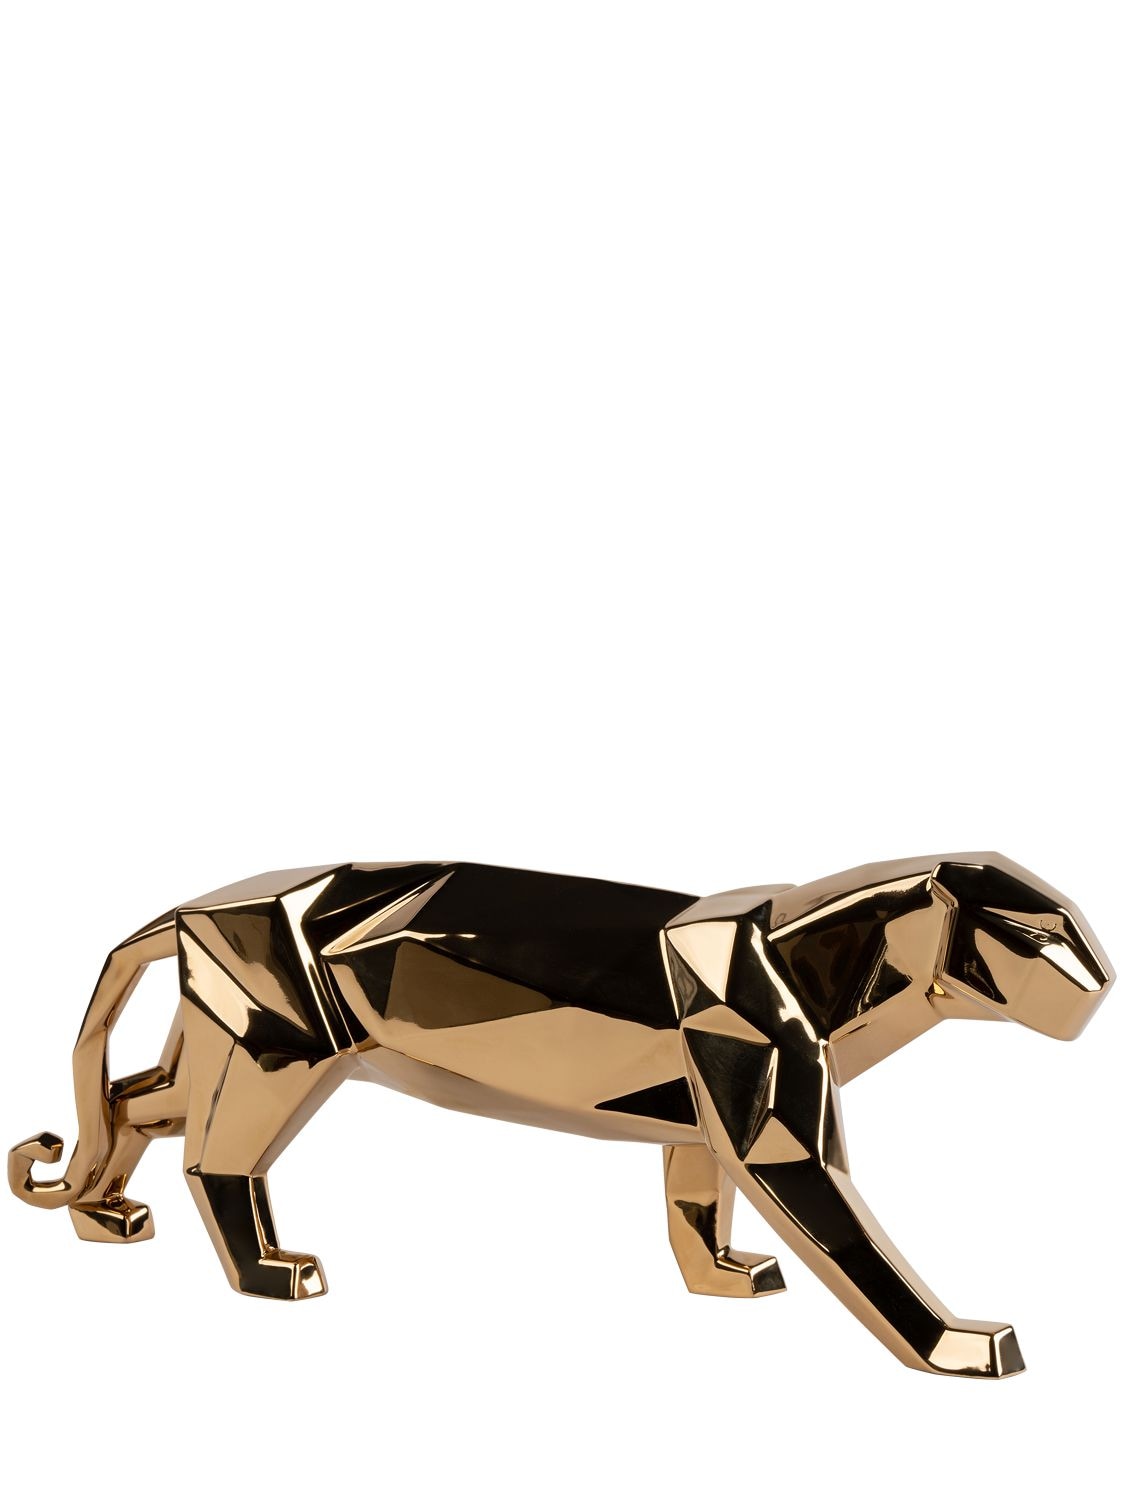 Image of Golden Panther Figurine